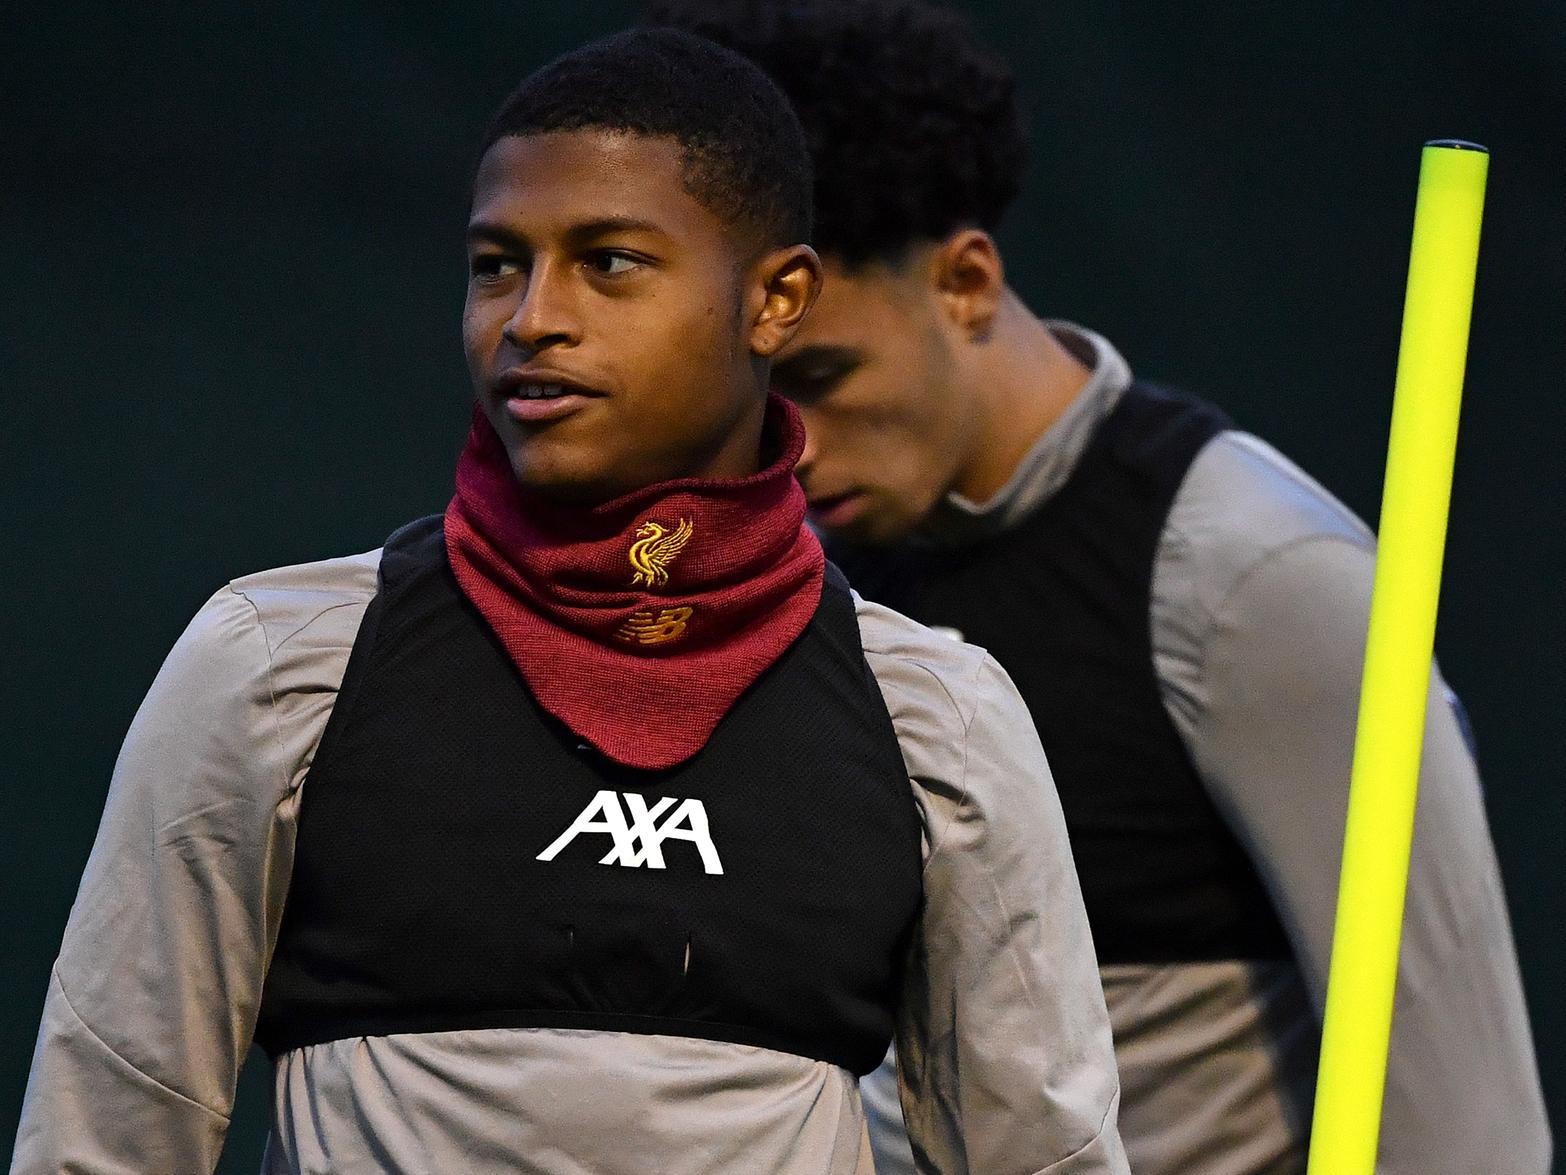 Leeds United's hopes of landing Liverpool wonderkid Rhian Brewster will be determinedby whether they can offer him regular first team football - an issue which has seen Eddie Nketiah'sfuture called into question. (Daily Mail)